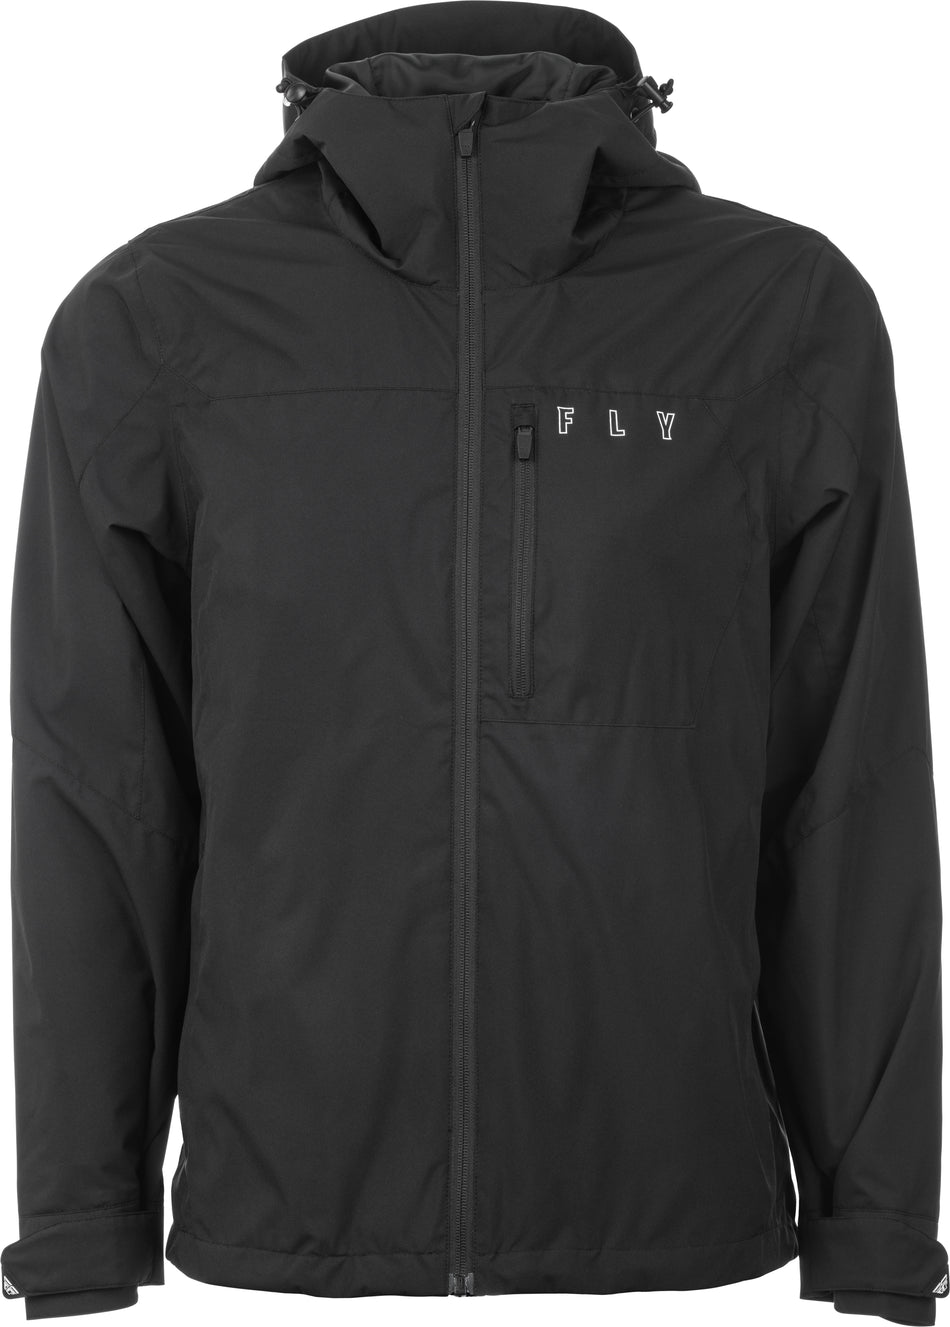 FLY RACING Fly Pit Jacket Black Sm 354-6361S